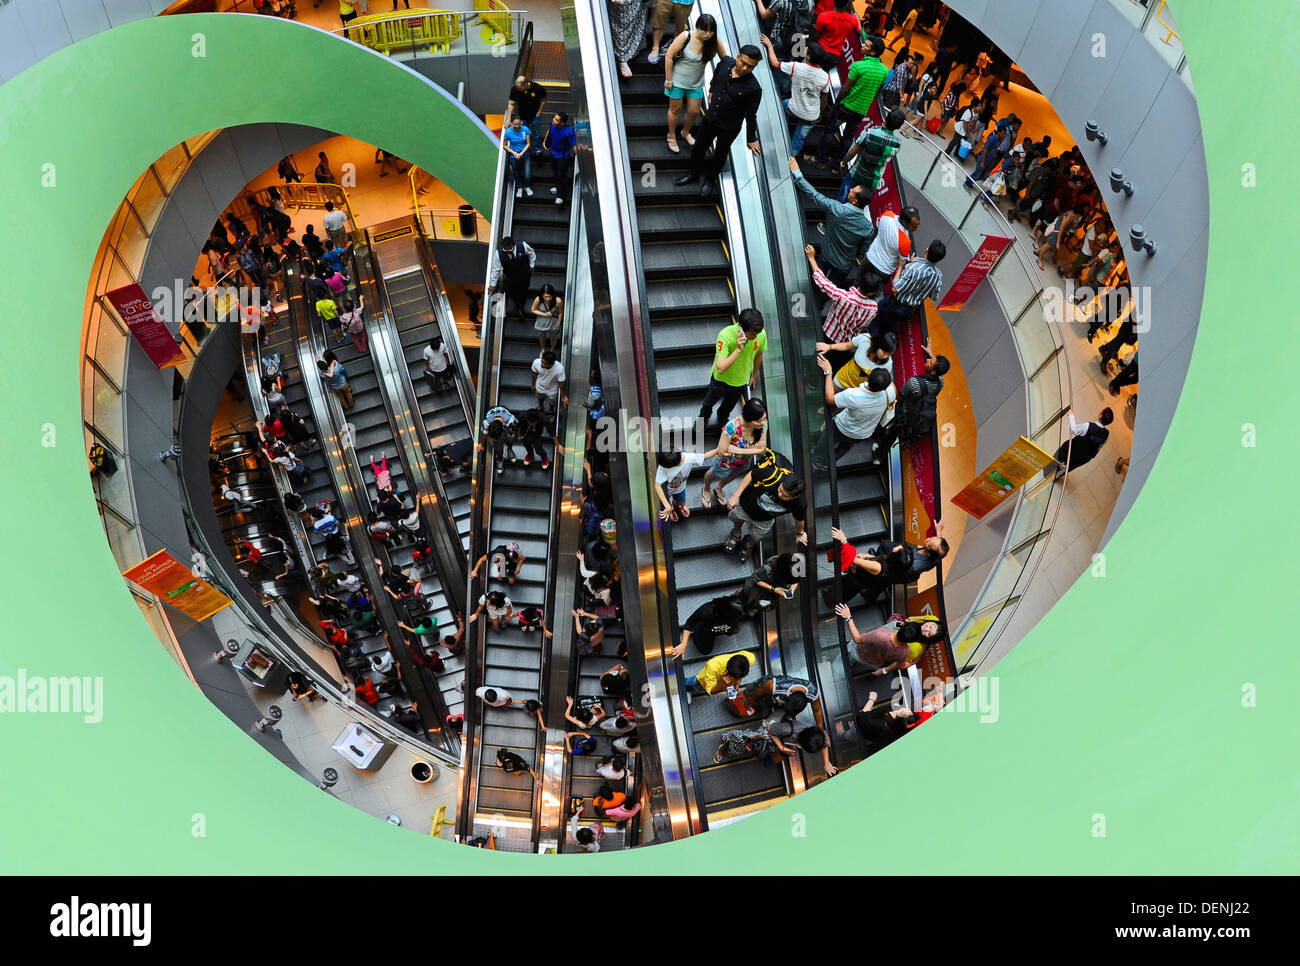 Shoppers and tourists using the escalators in the shopping center on Sentosa island in Singapore. Stock Photo